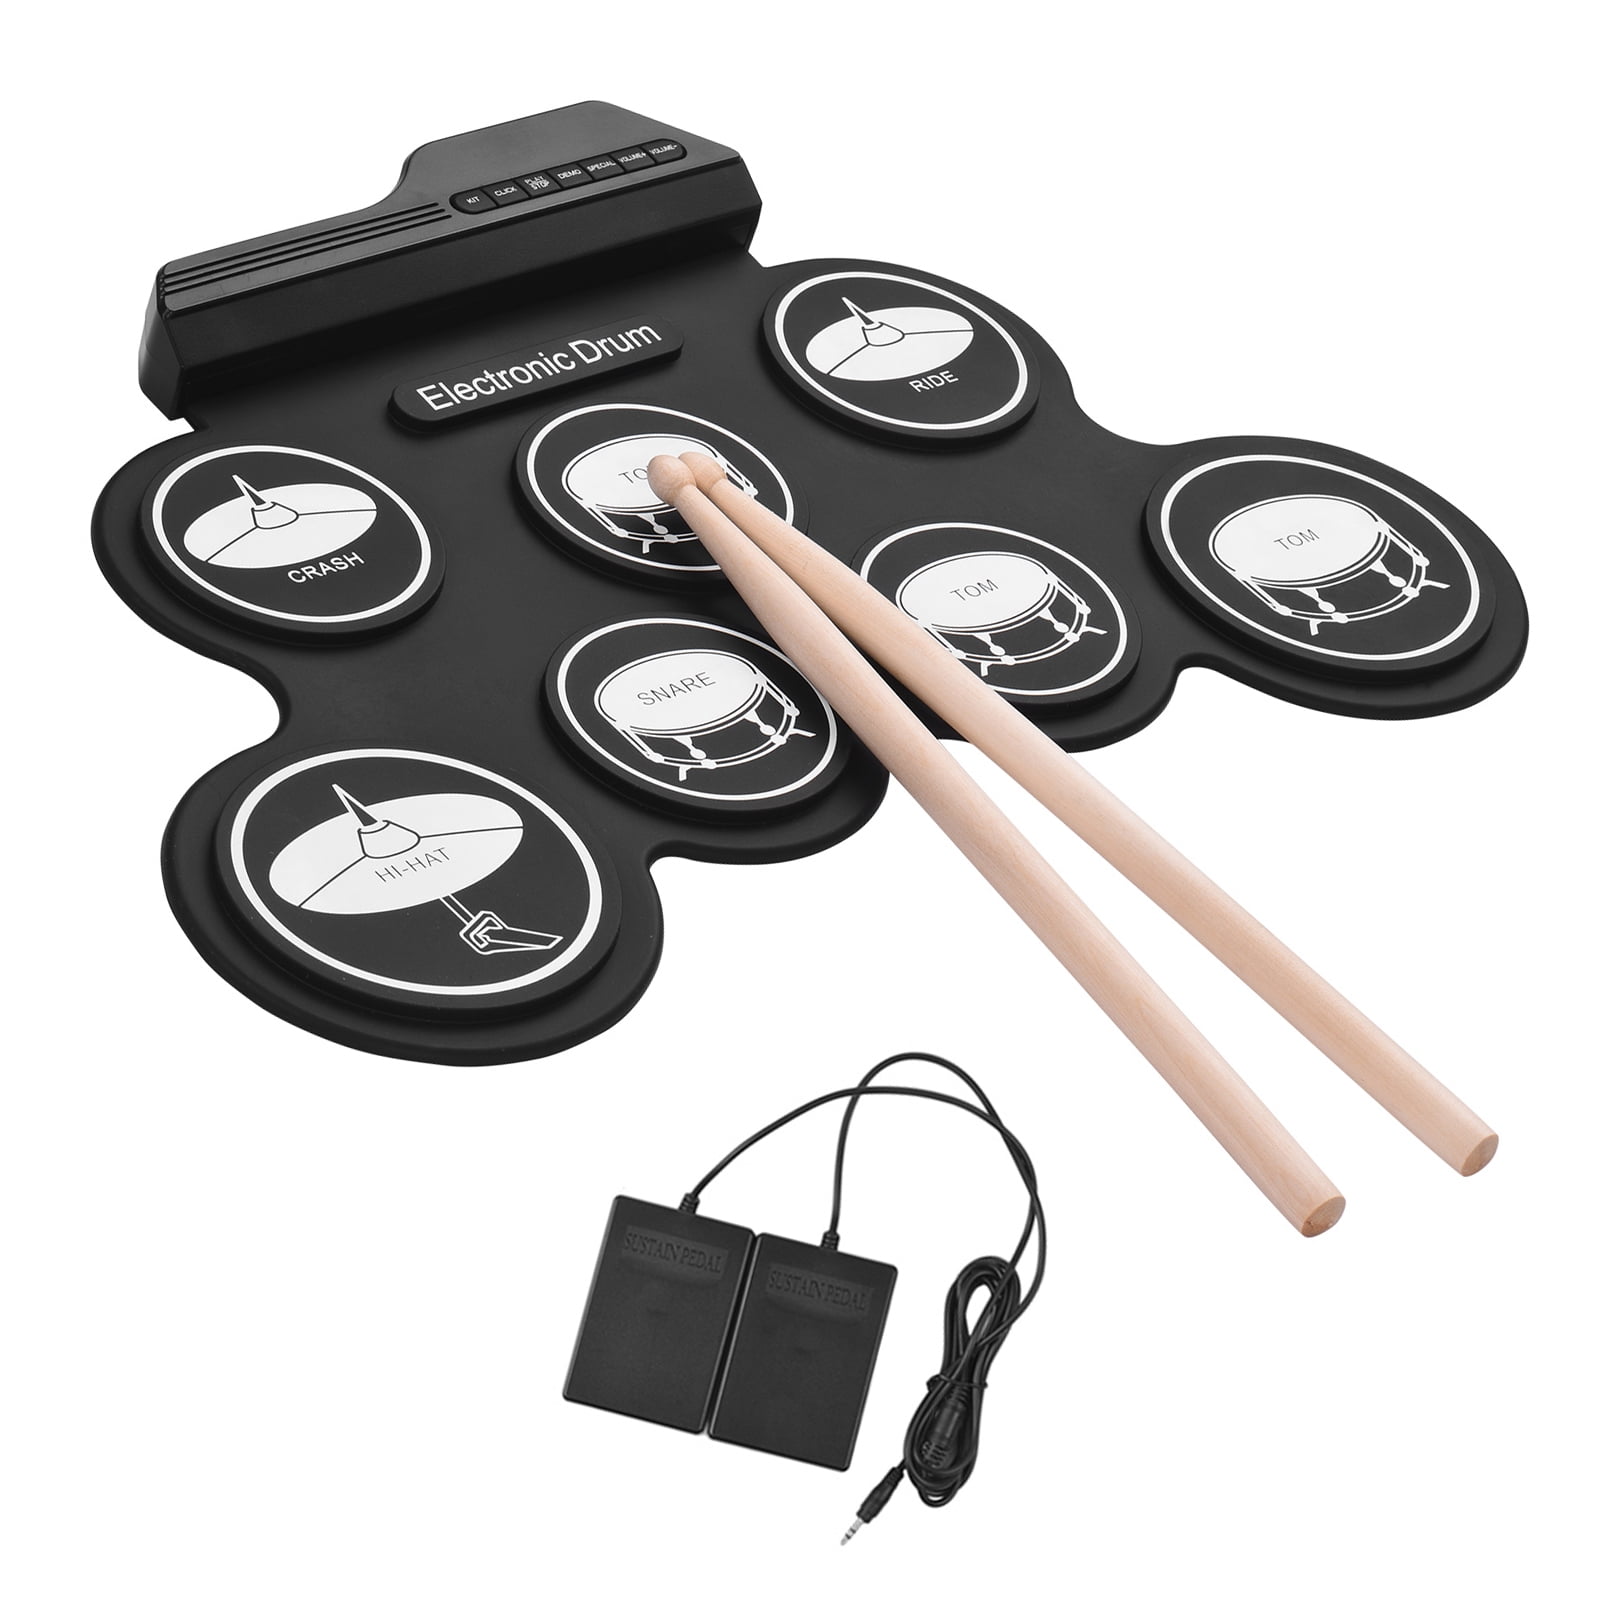 Portable Electronic Drum Set - ammoon Digital Roll-Up Touch Sensitive  Practice Drum Kit 9 Drum Pads 2 Foot Pedals for Kids Children Beginners (No  Speakers)